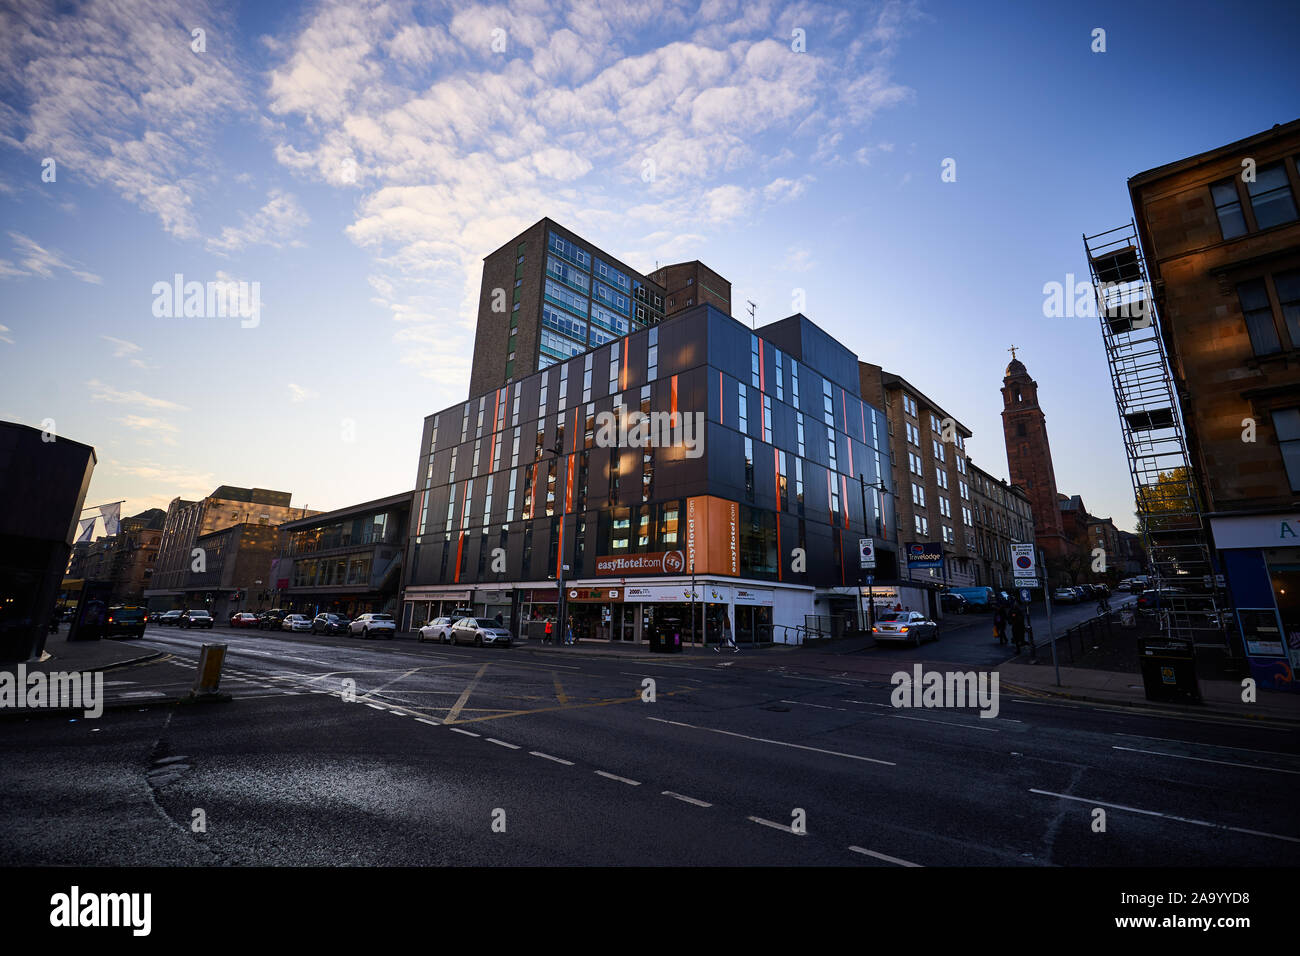 easyHotel Glasgow City Centre. Located on Hill Street in the Scottish city offering budget accommodation. Stock Photo